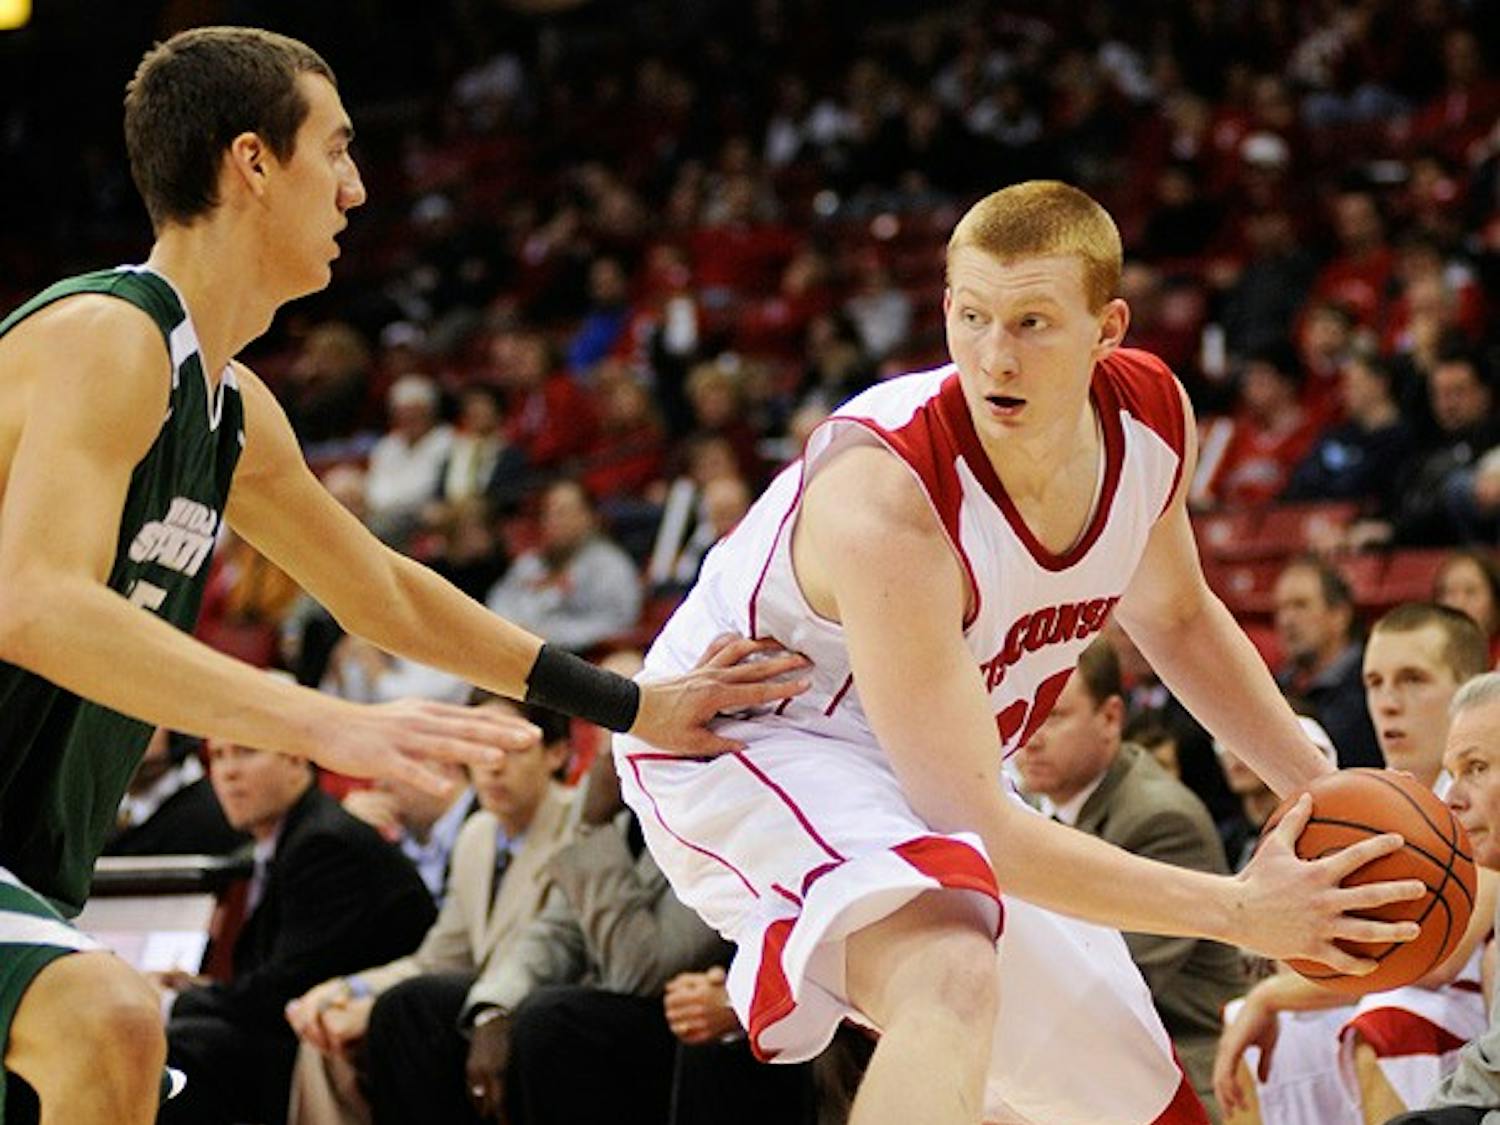 Badgers look to stay in race against Indiana